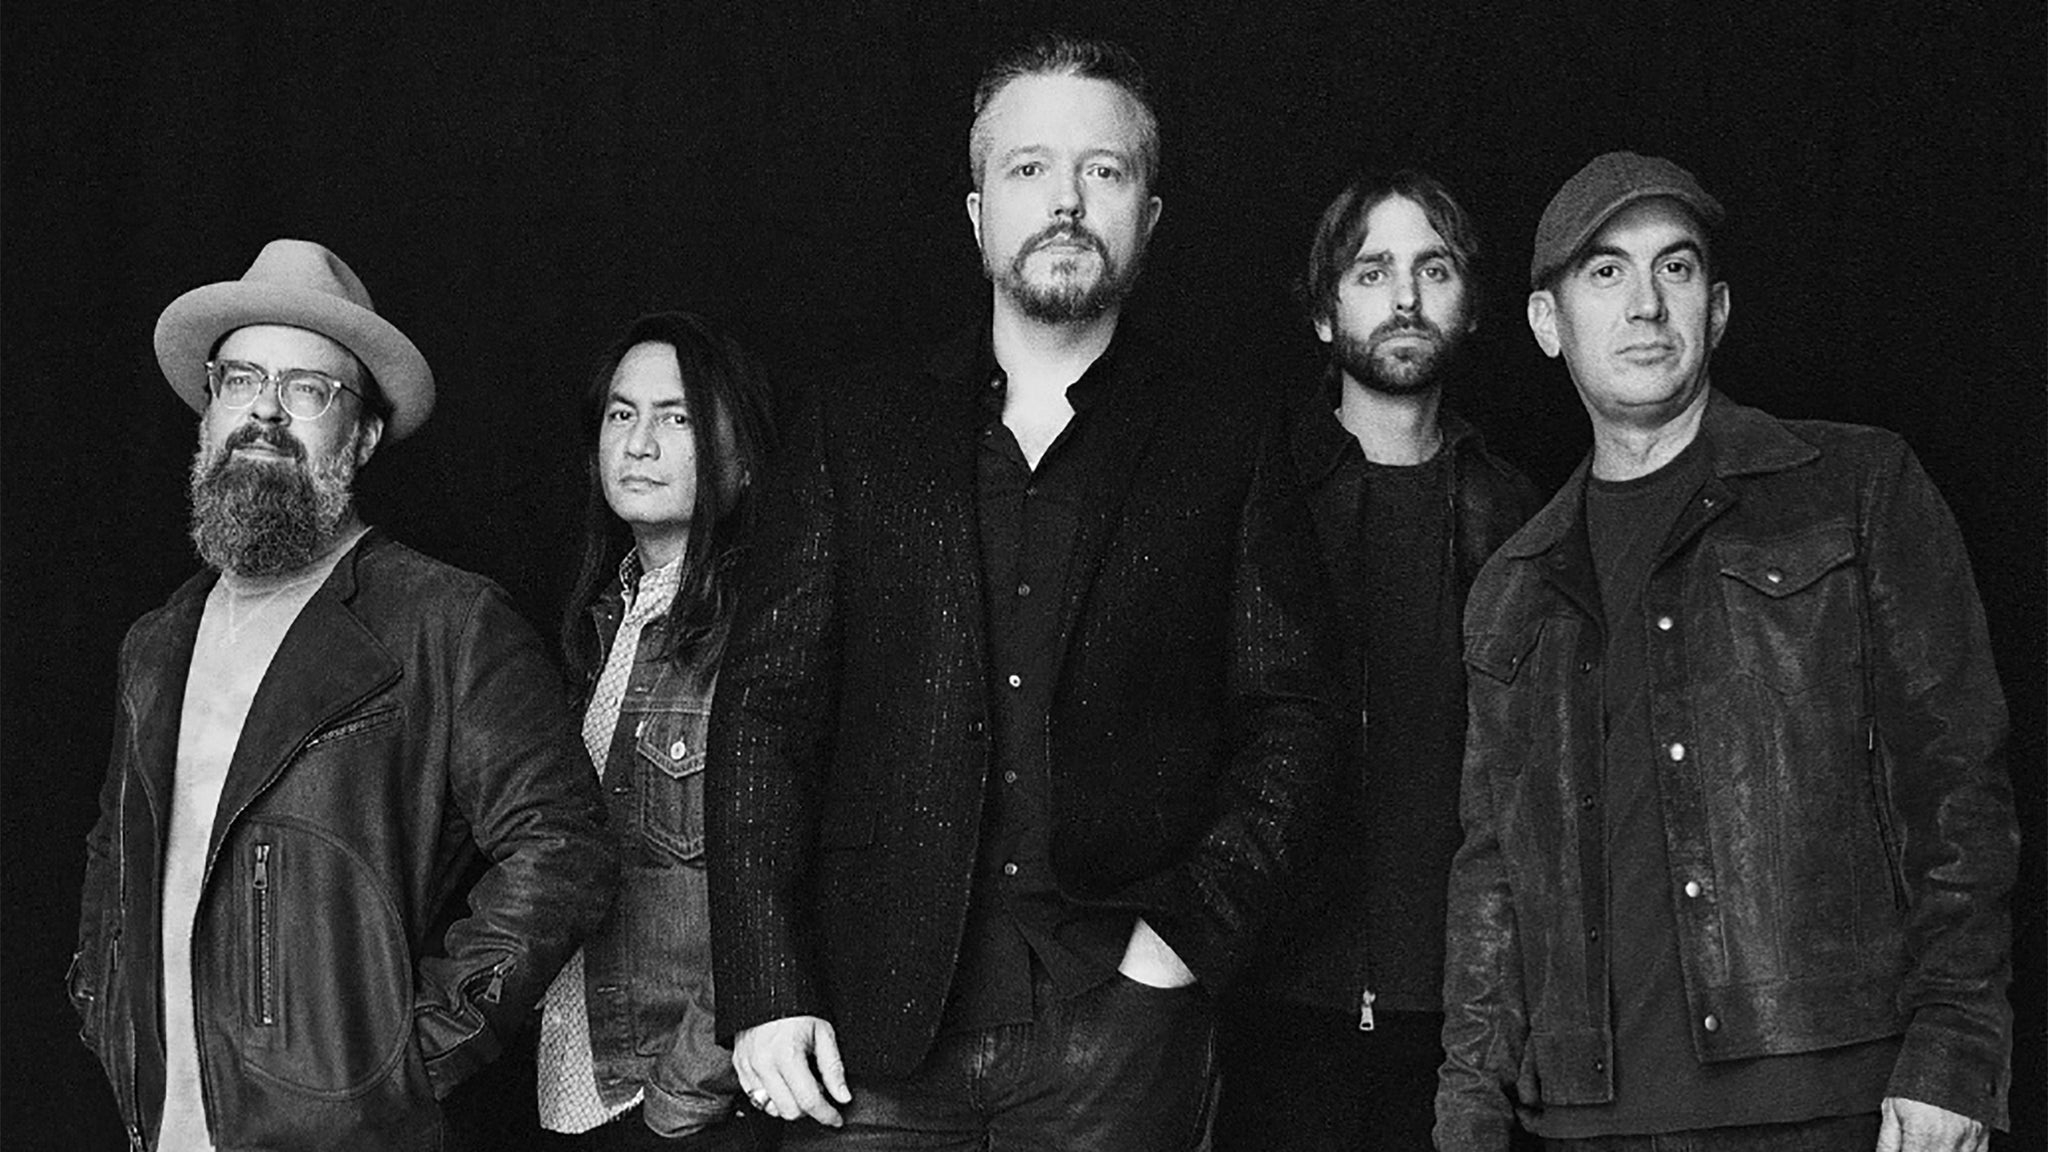 Jason Isbell and the 400 Unit pre-sale password for advance tickets in Joliet